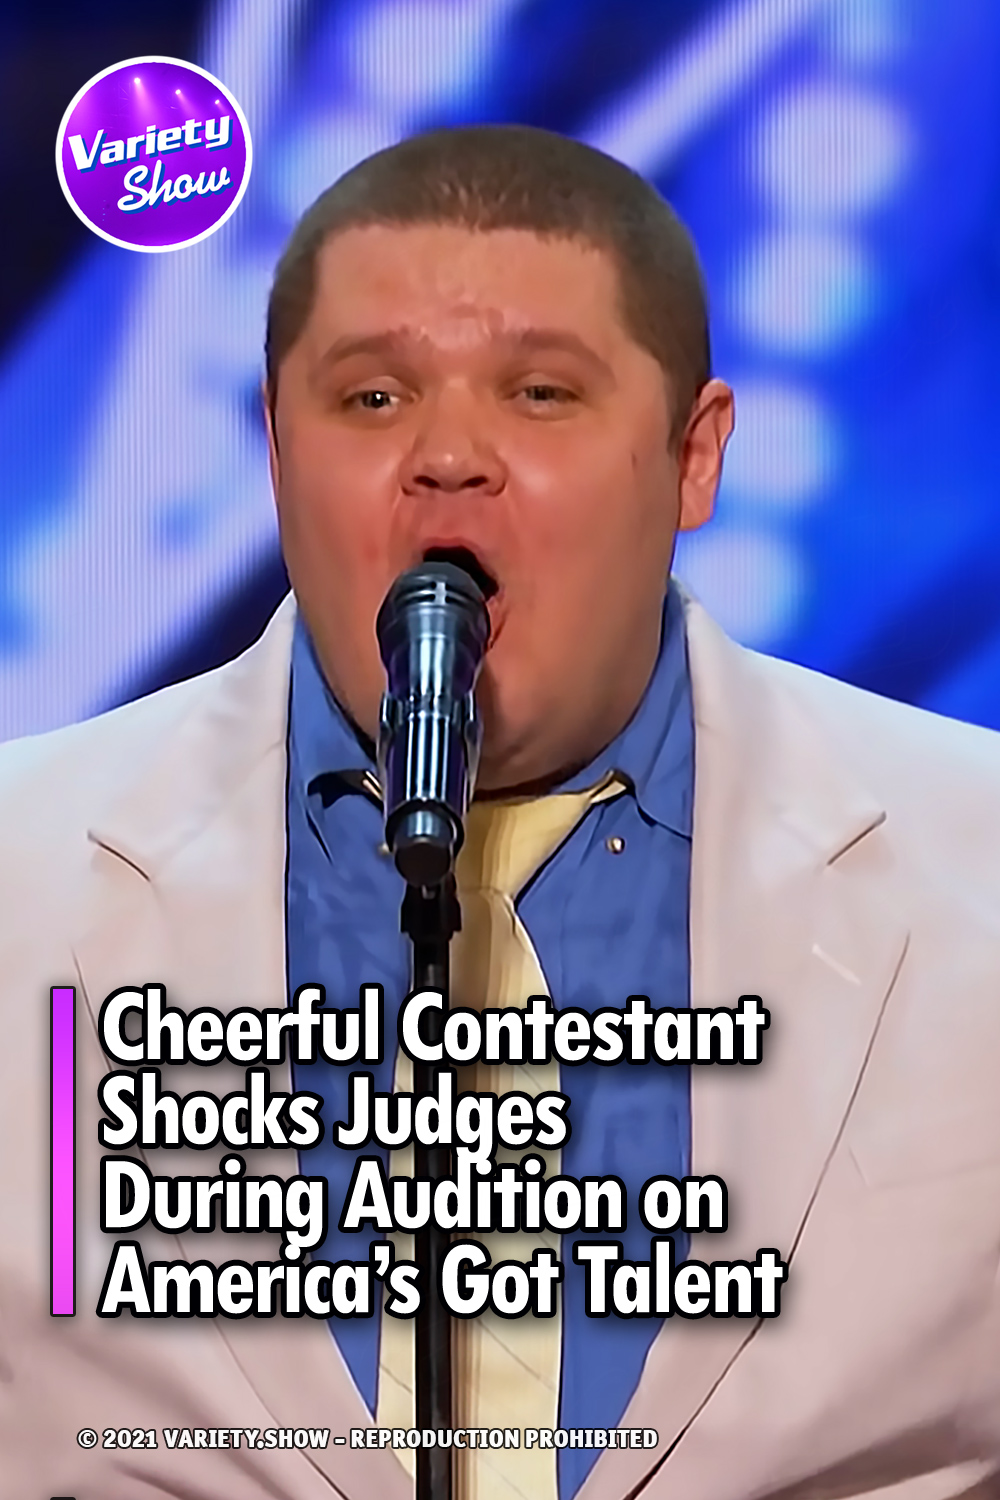 Cheerful Contestant Shocks Judges During Audition on America’s Got Talent